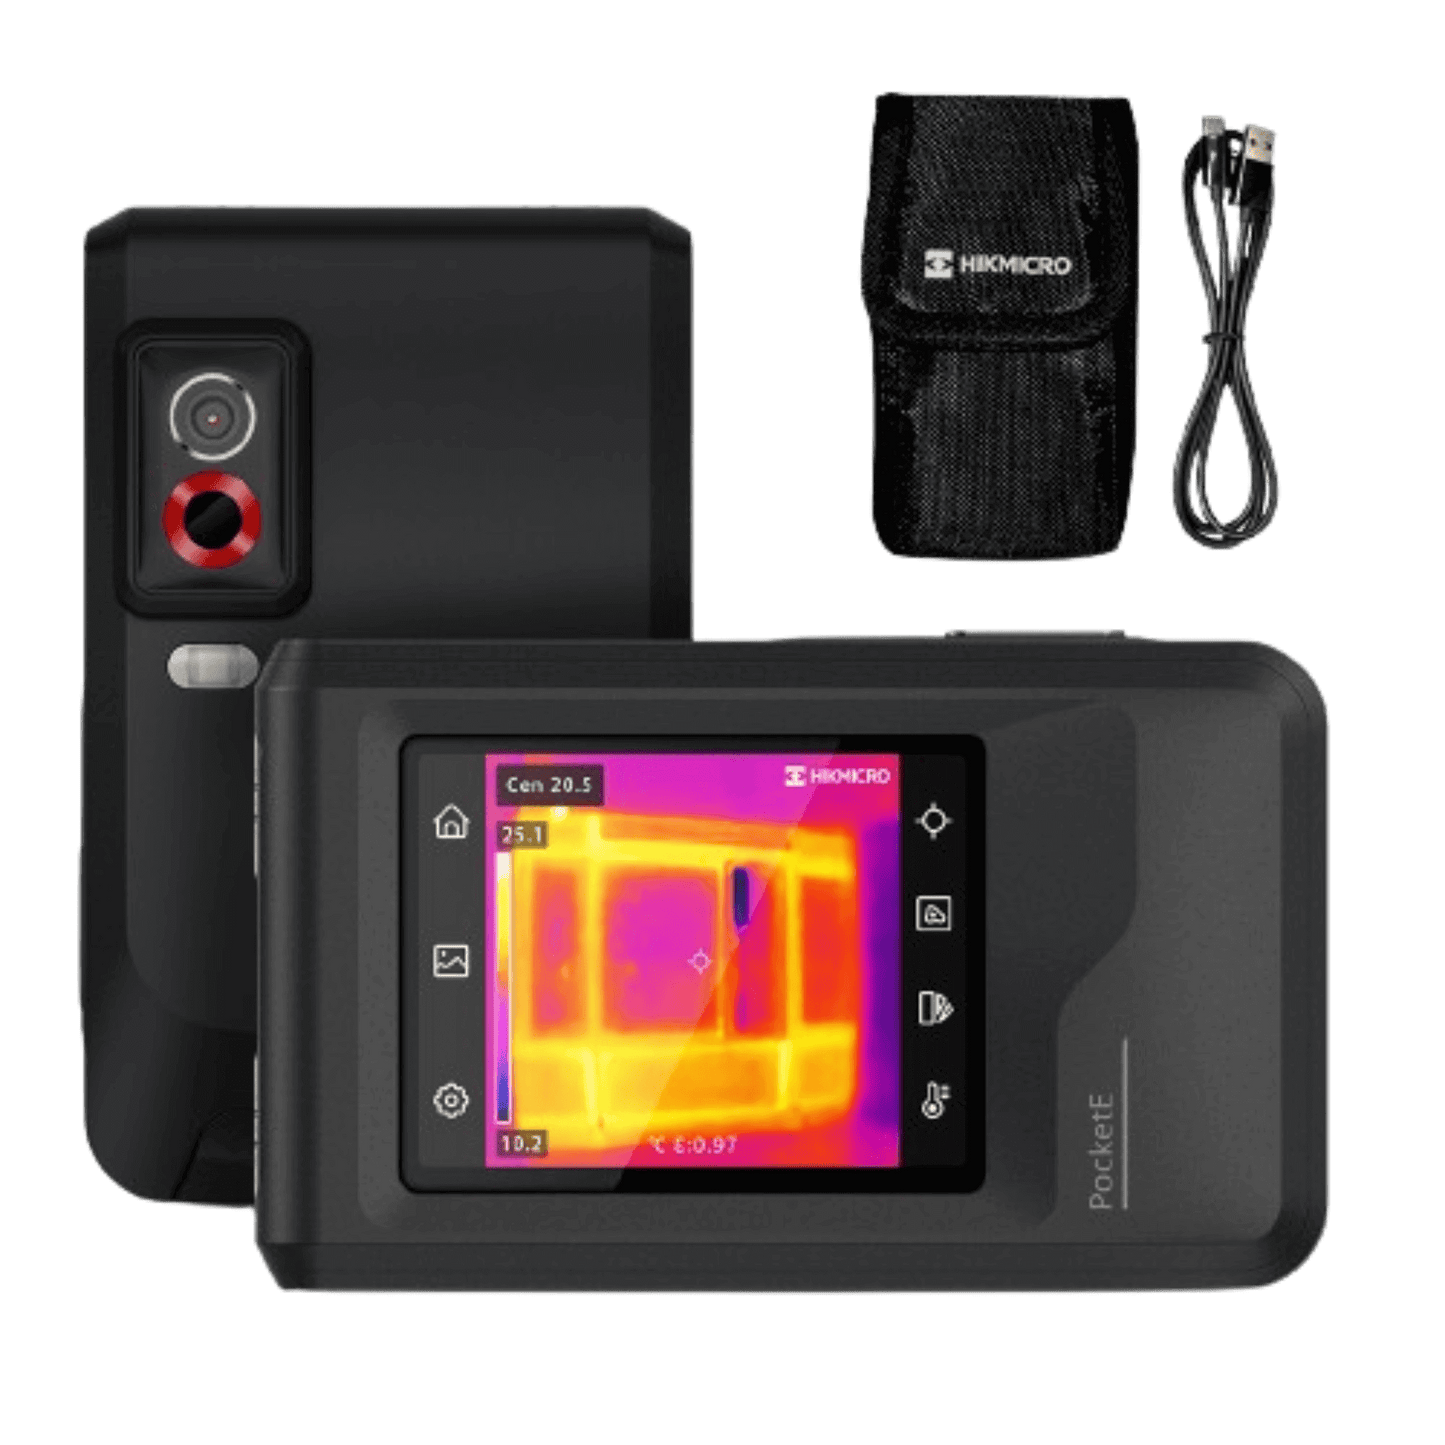 HikMicro PocketE Handheld Thermal Imager with Touchscreen (1.35mm) (96x96)